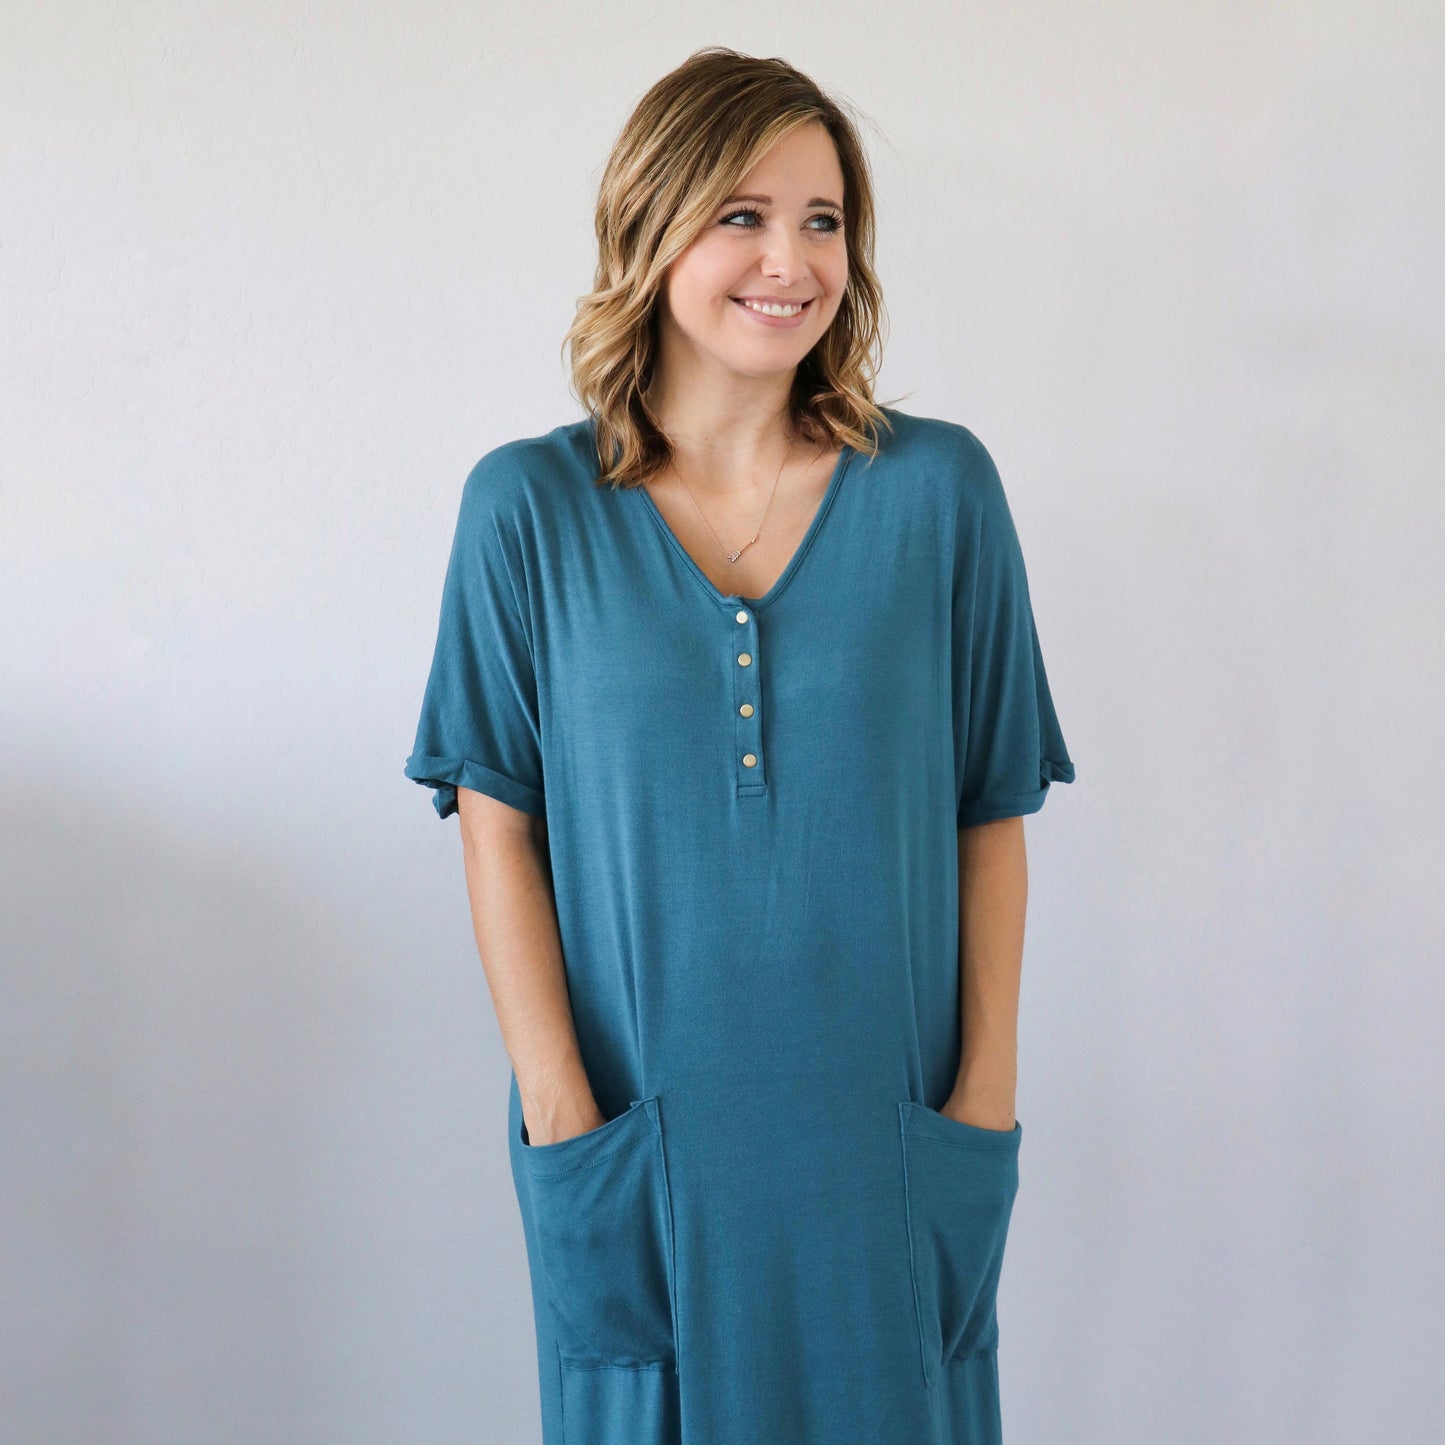 24/7 Dress in Teal